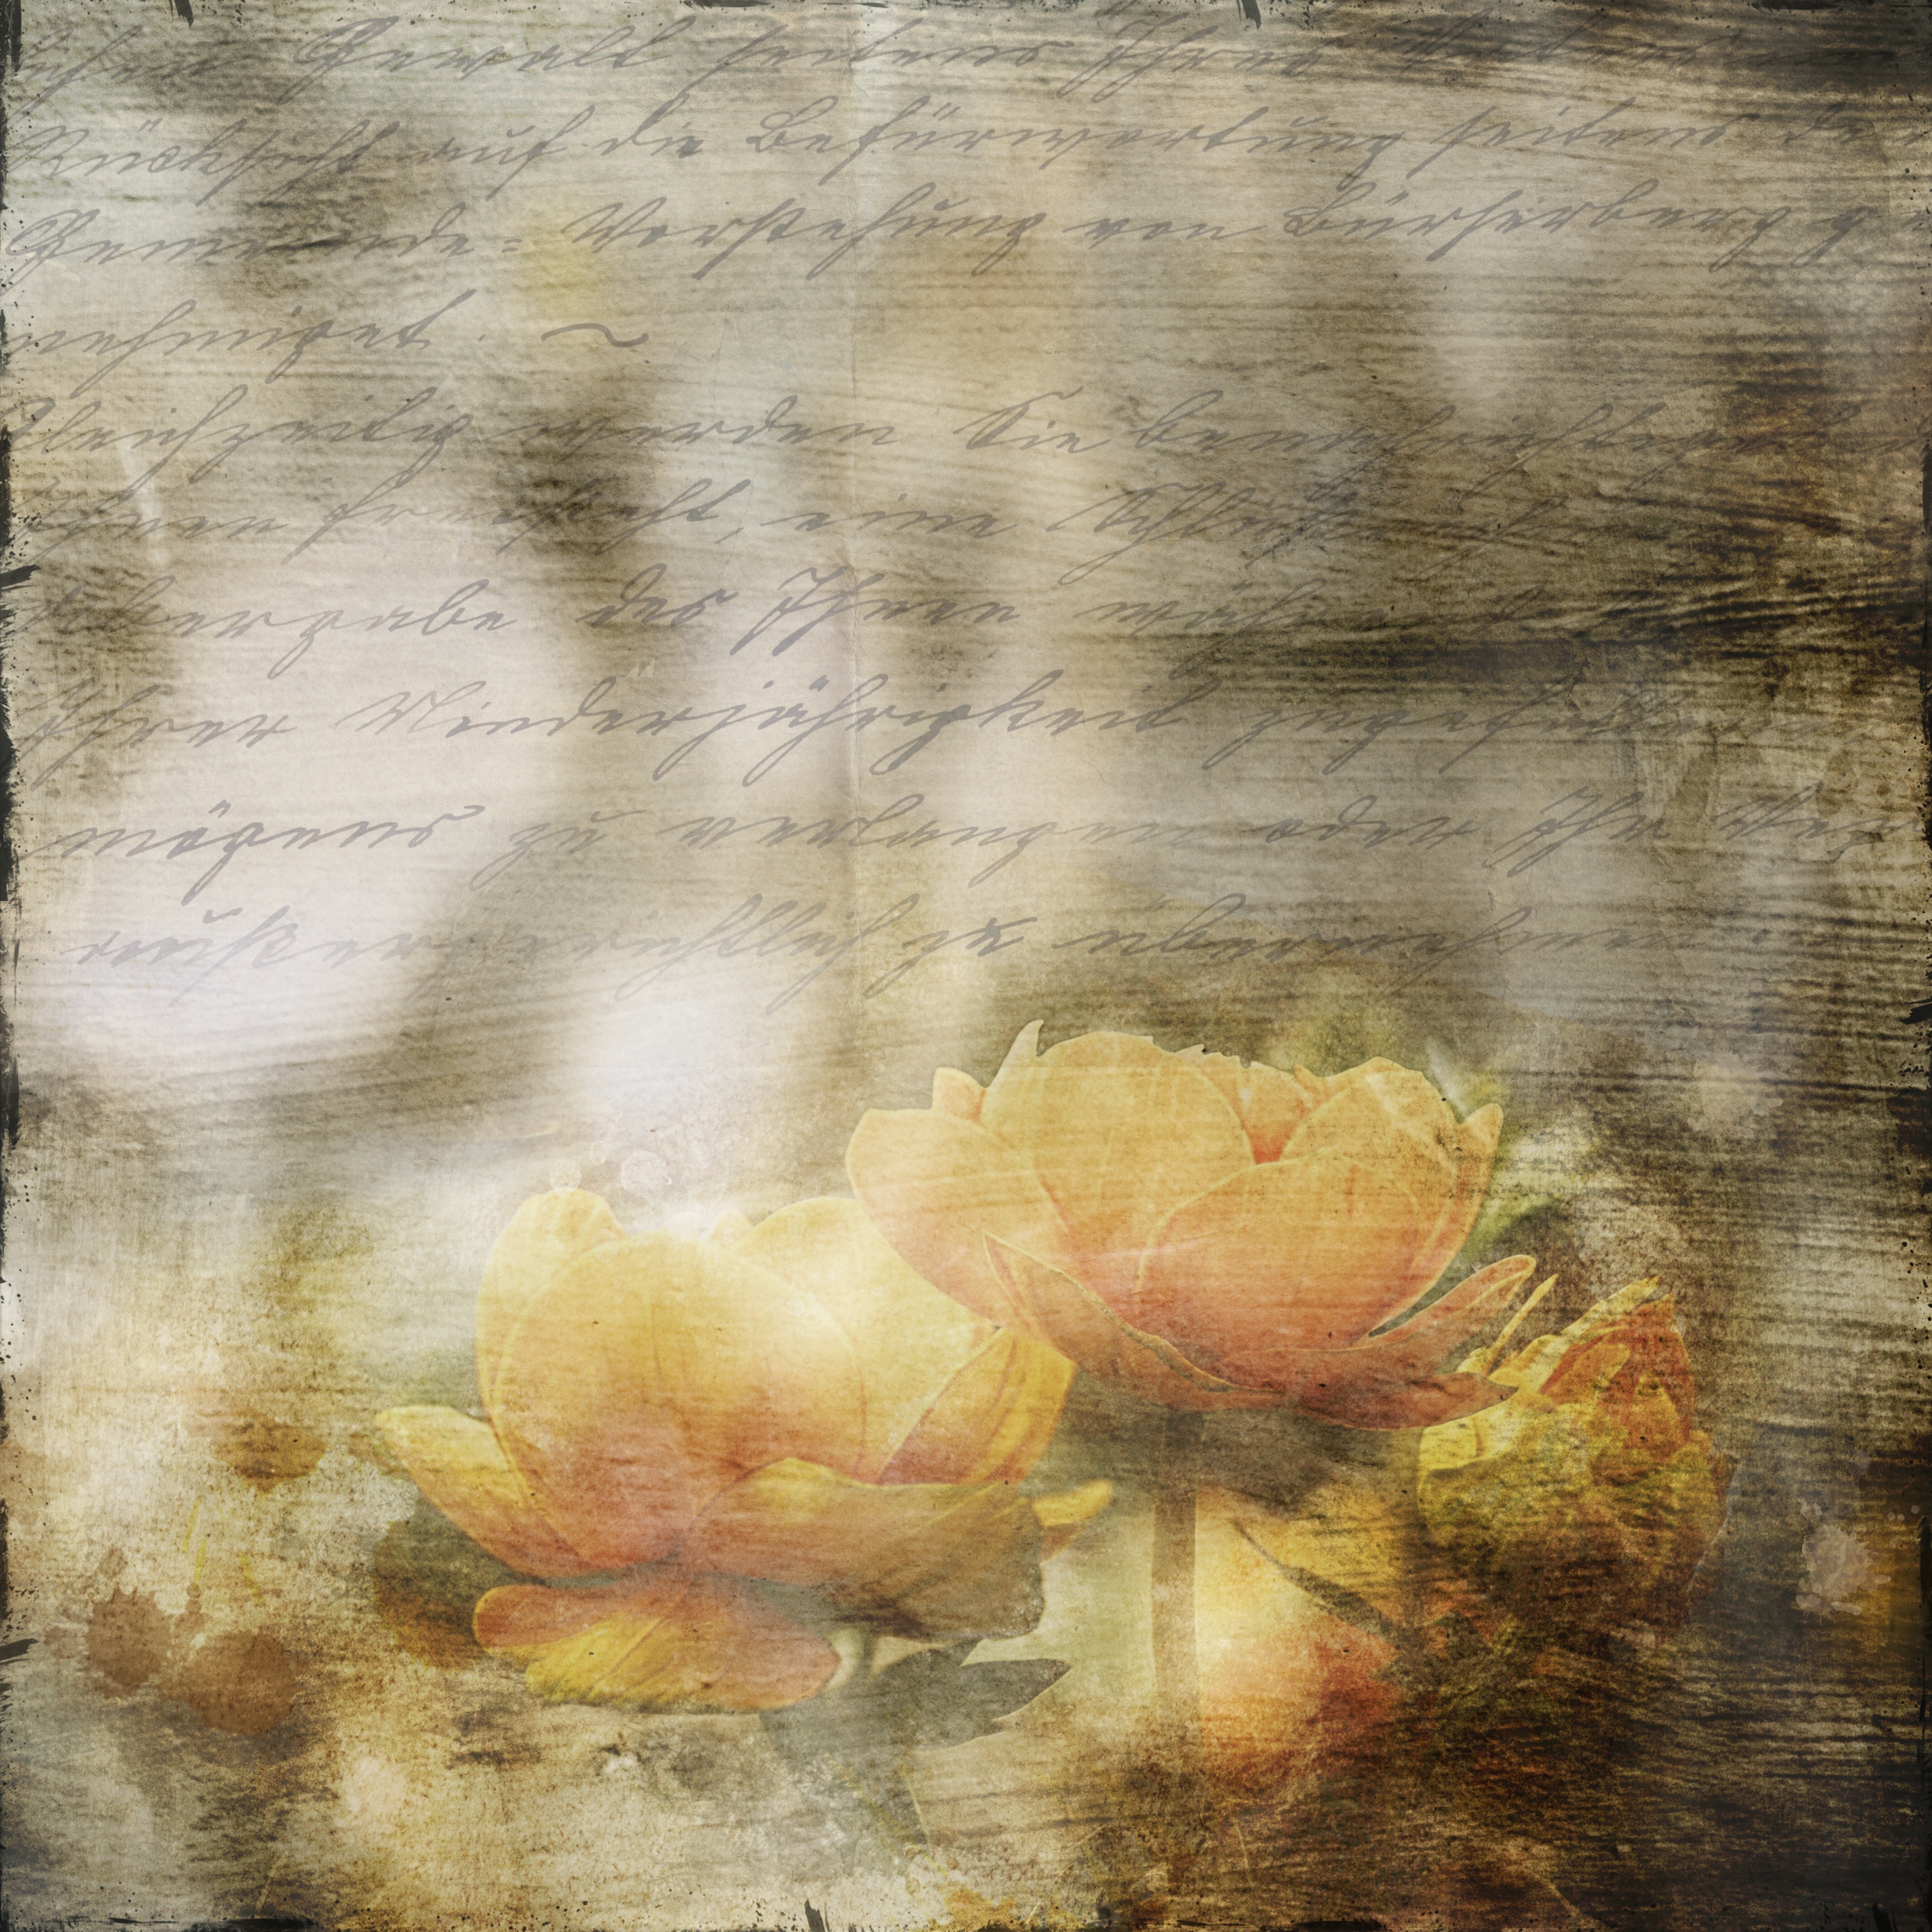 Flowers, Font, Old, Art, Letters, textured, no people